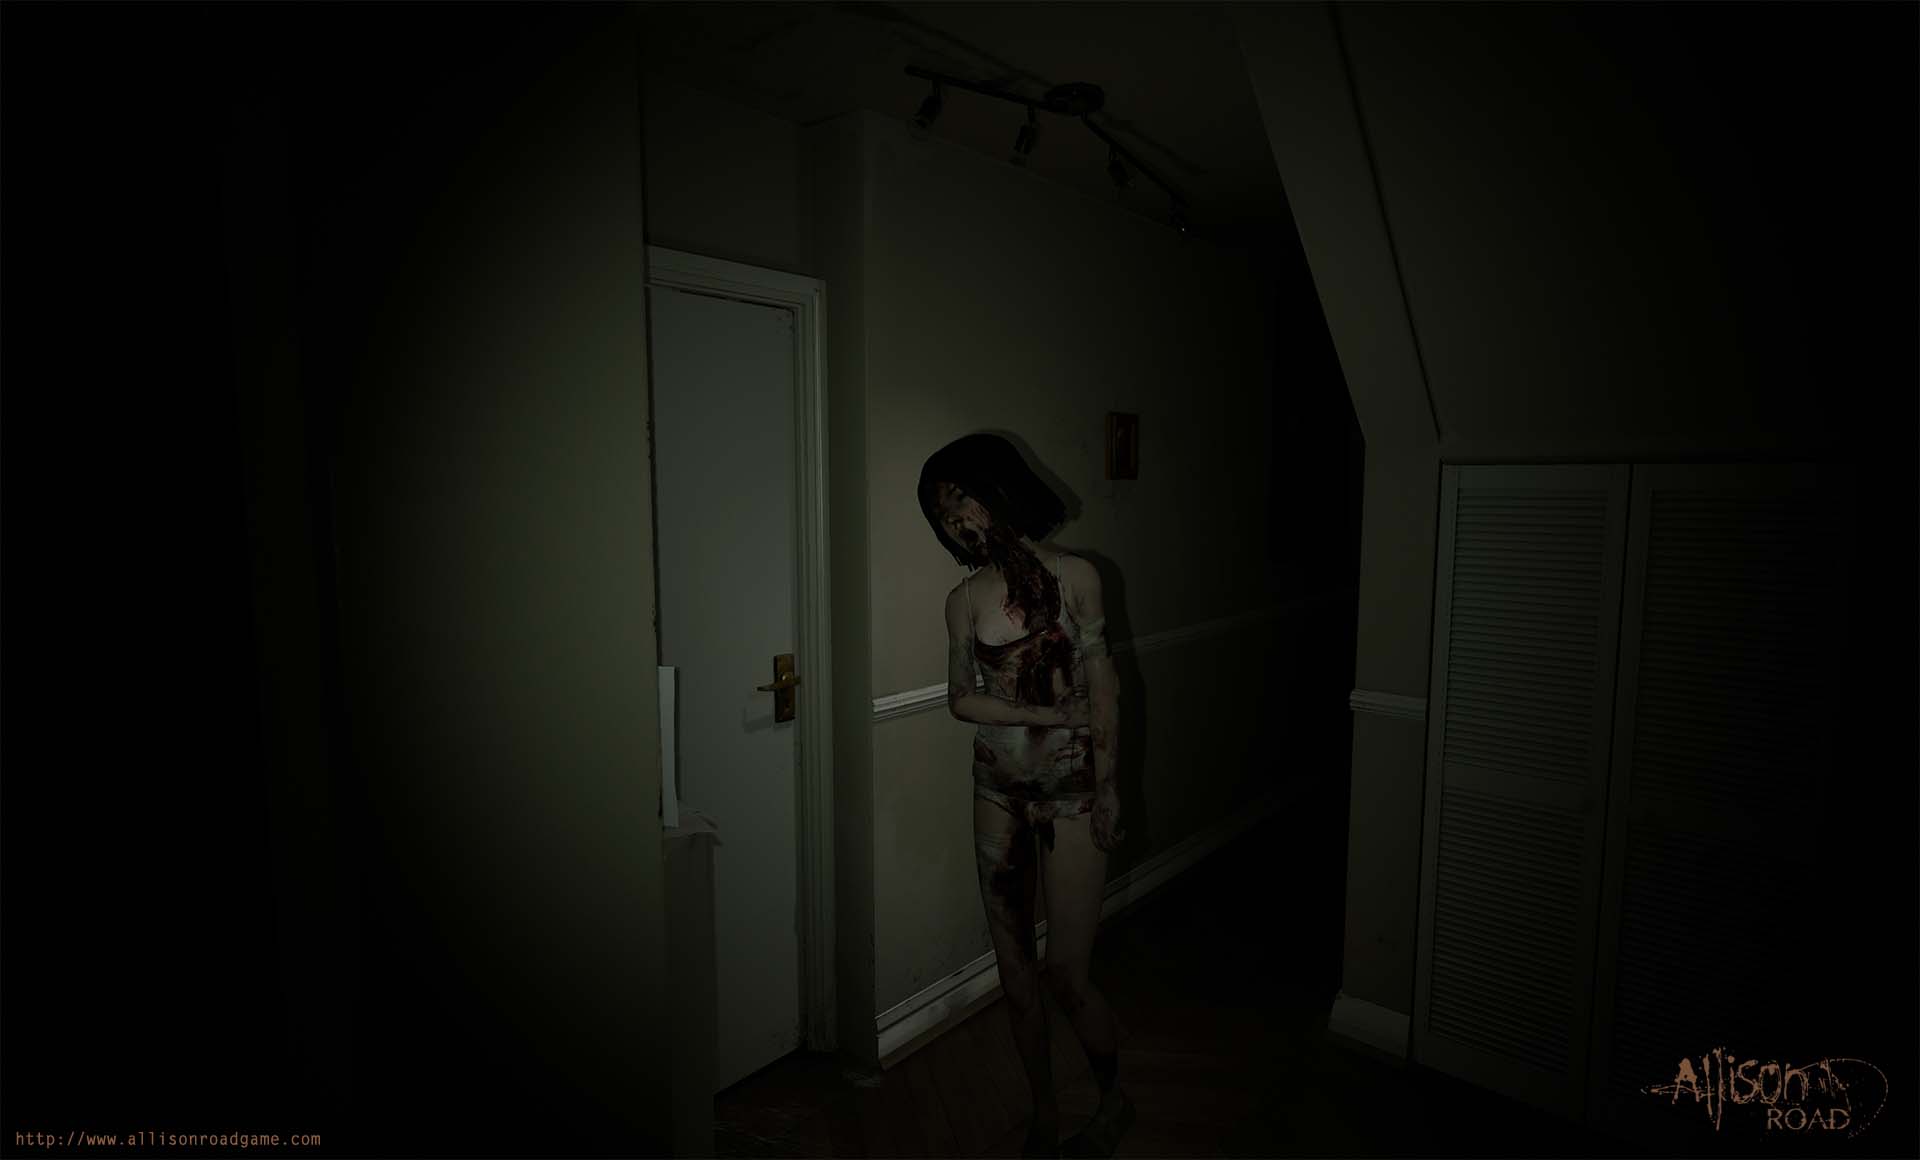 Kickstarter Page of P.T. inspired game, Allison Road, is Now Up